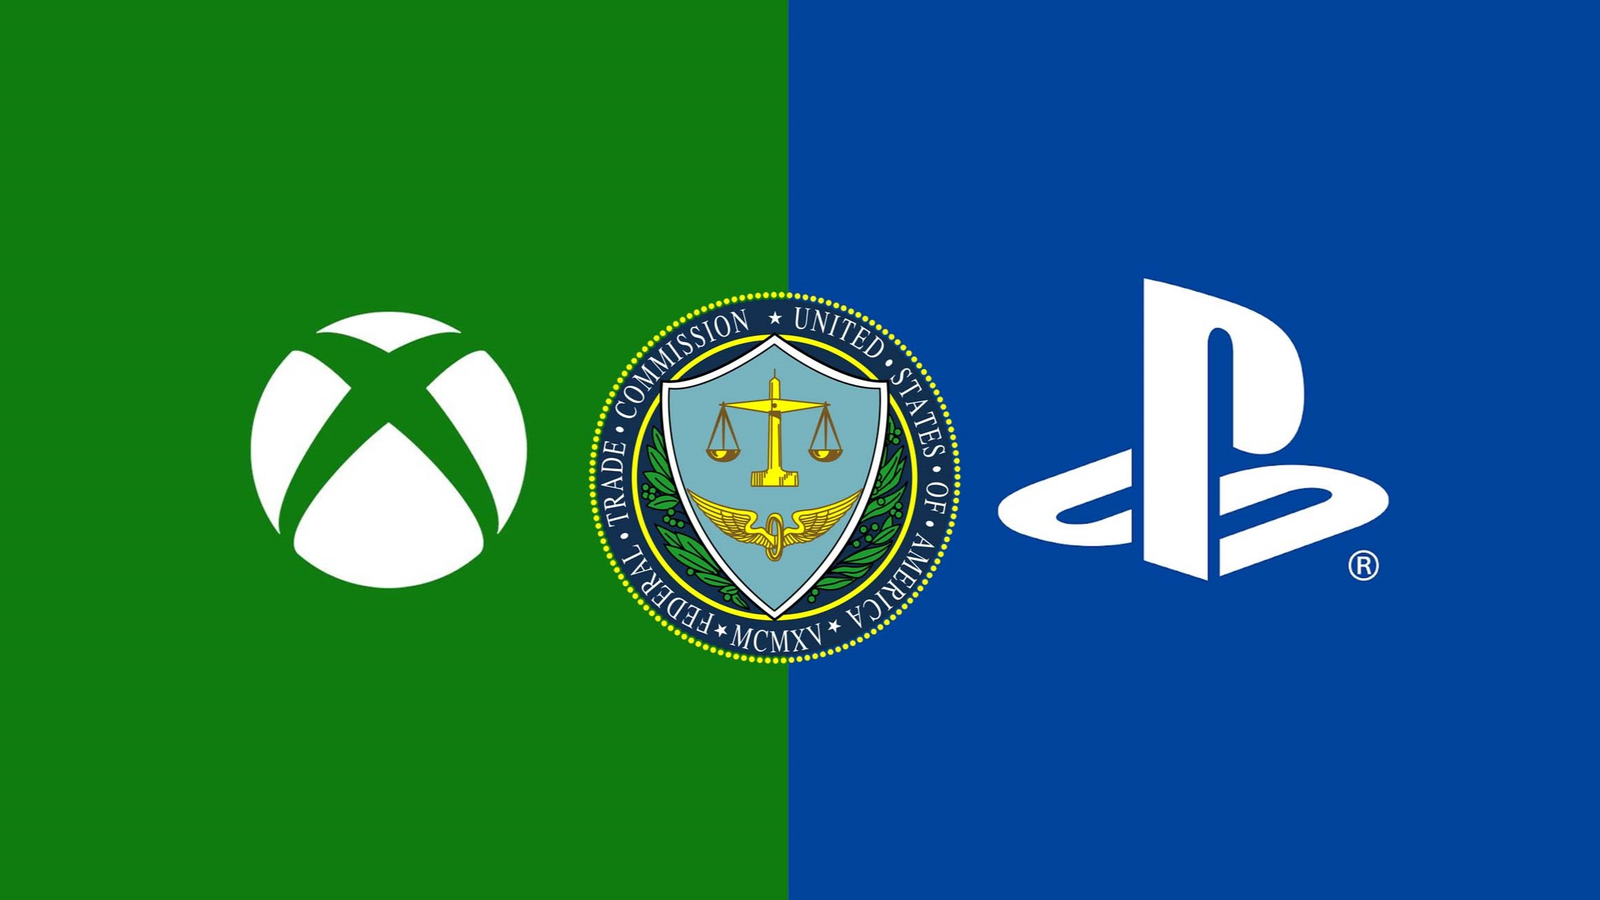 Microsoft Activision Deal May Close Without CMA & FTC 